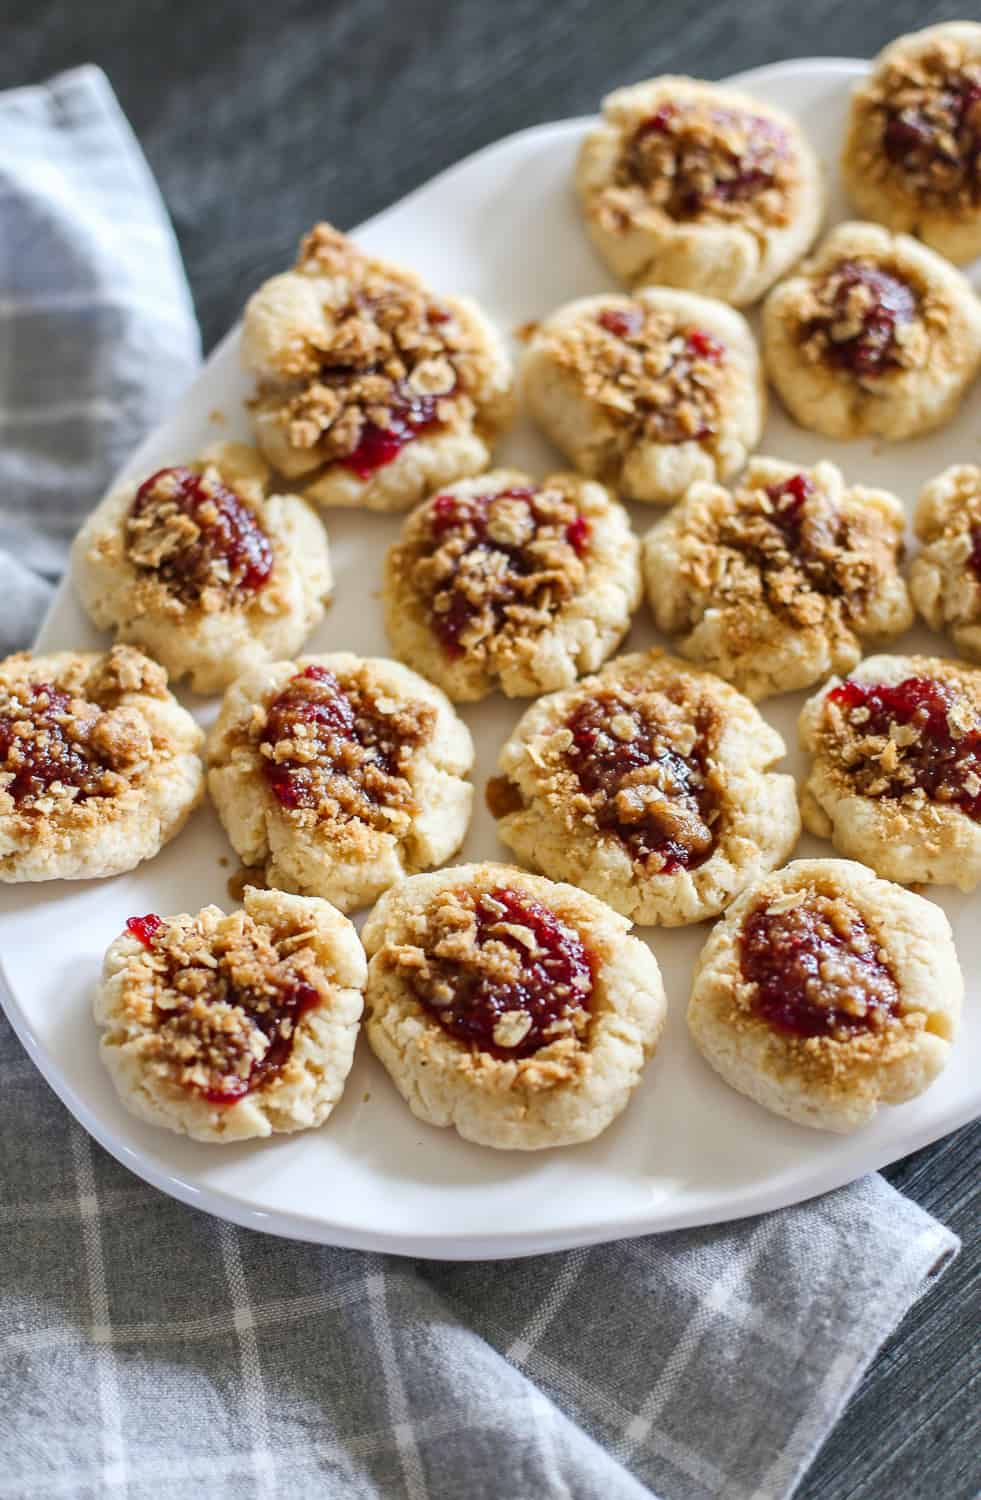 Raspberry crumble cookies on a white plate.